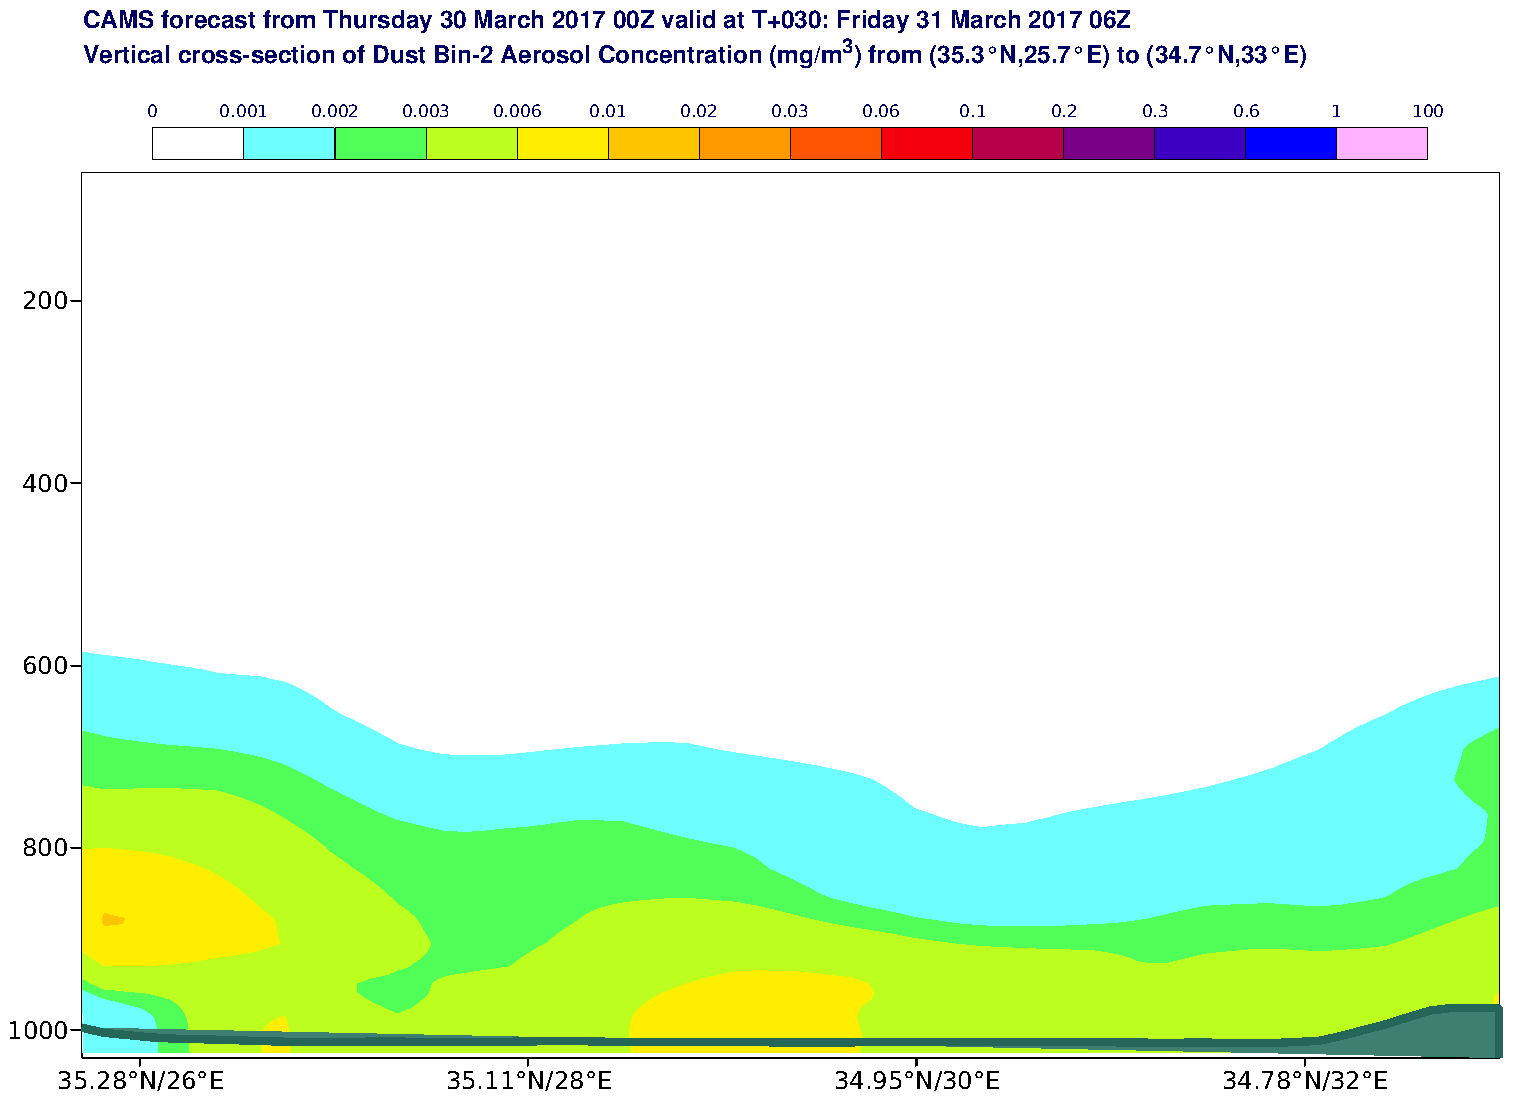 Vertical cross-section of Dust Bin-2 Aerosol Concentration (mg/m3) valid at T30 - 2017-03-31 06:00